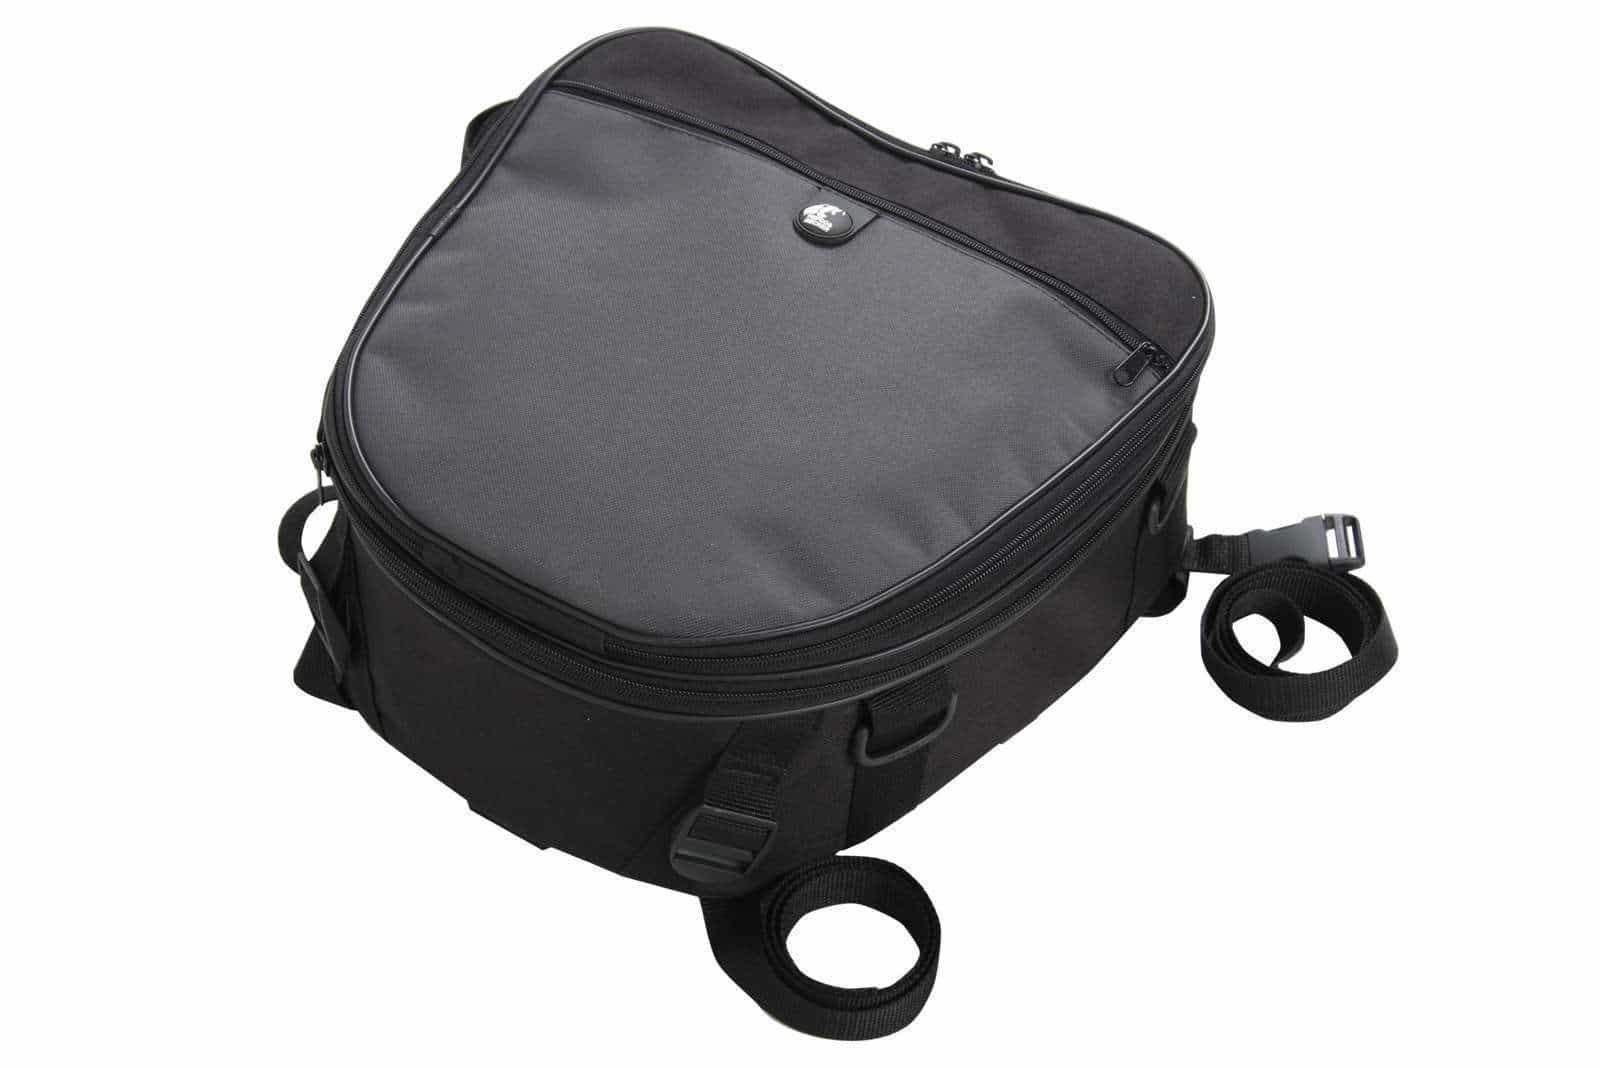 Small Sport Star rear bag 18-28 ltr with belt attachment